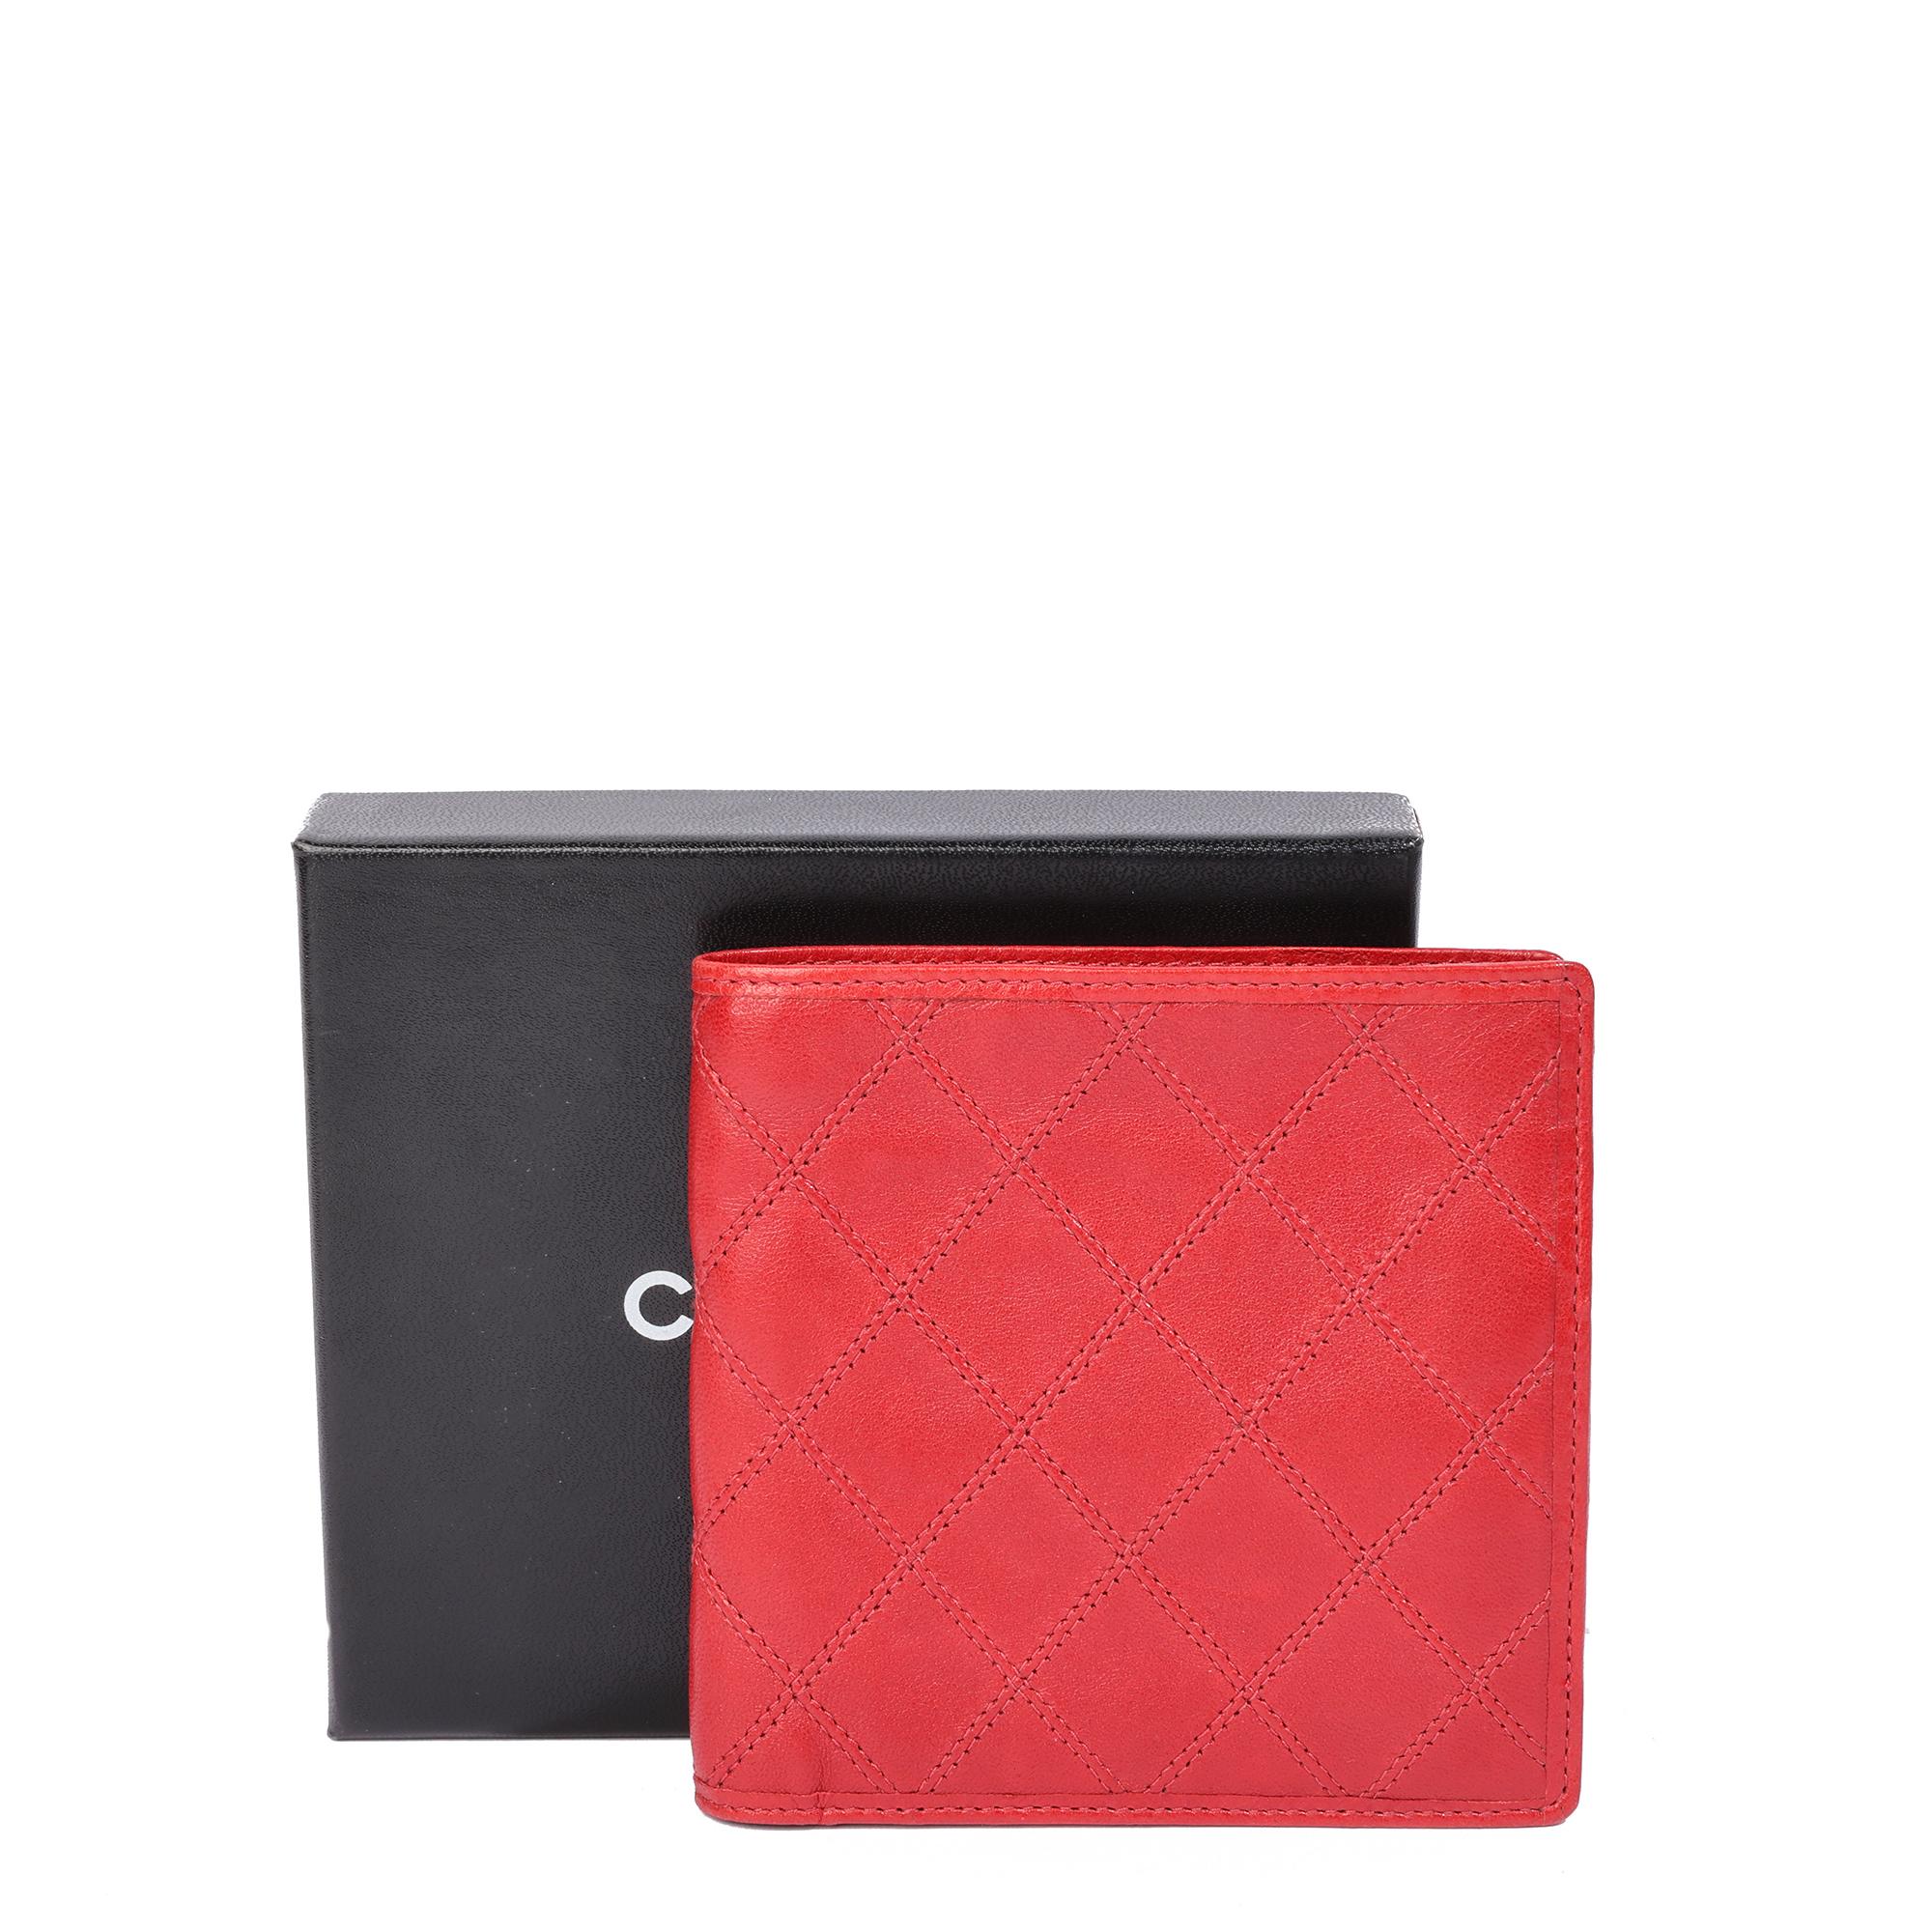 BRAND	Chanel
MODEL	Timeless Bi-Fold Wallet
AGE	1980's
GENDER	Women's
MATERIAL(S)	Lambskin Leather
COLOUR	Red
INTERIOR	Red Leather
ACCOMPANIED BY	Chanel Box
HEIGHT	11cm
WIDTH	11.5cm
DEPTH	1cm
AUTHENTICITY DETAILS	Date Stamp